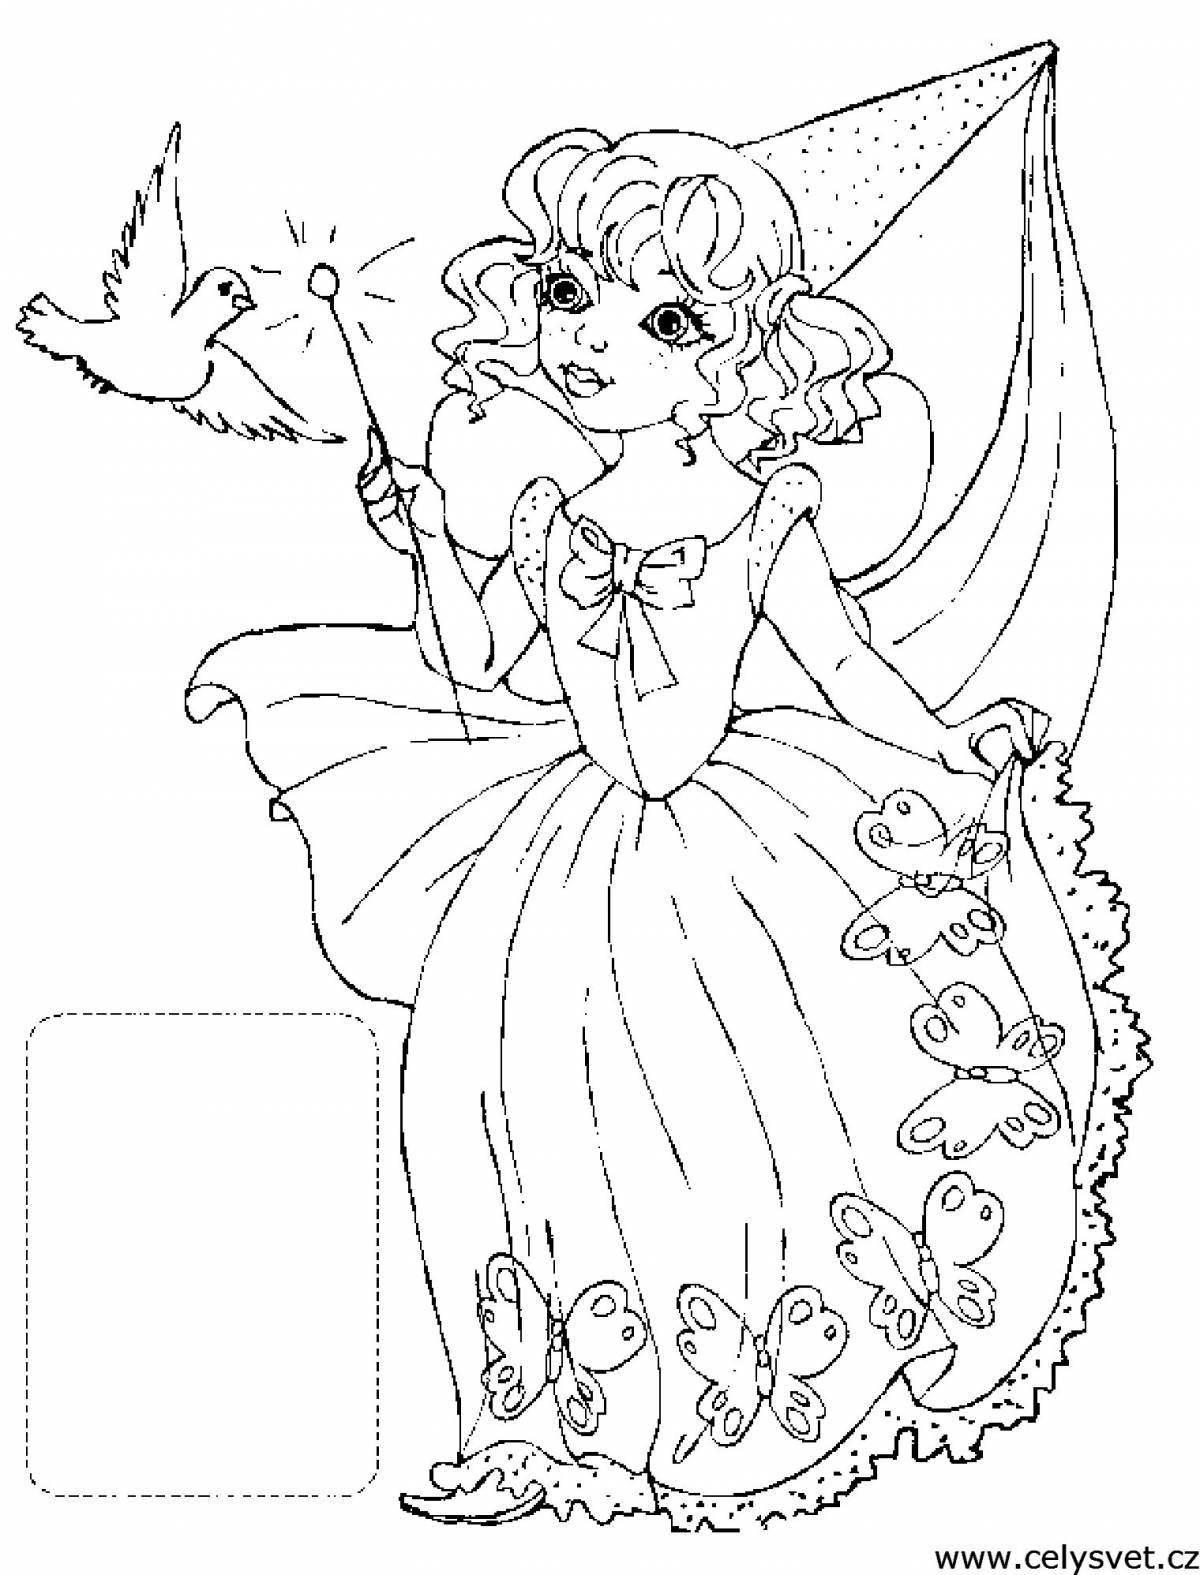 Adorable fairy coloring book for kids 5-6 years old